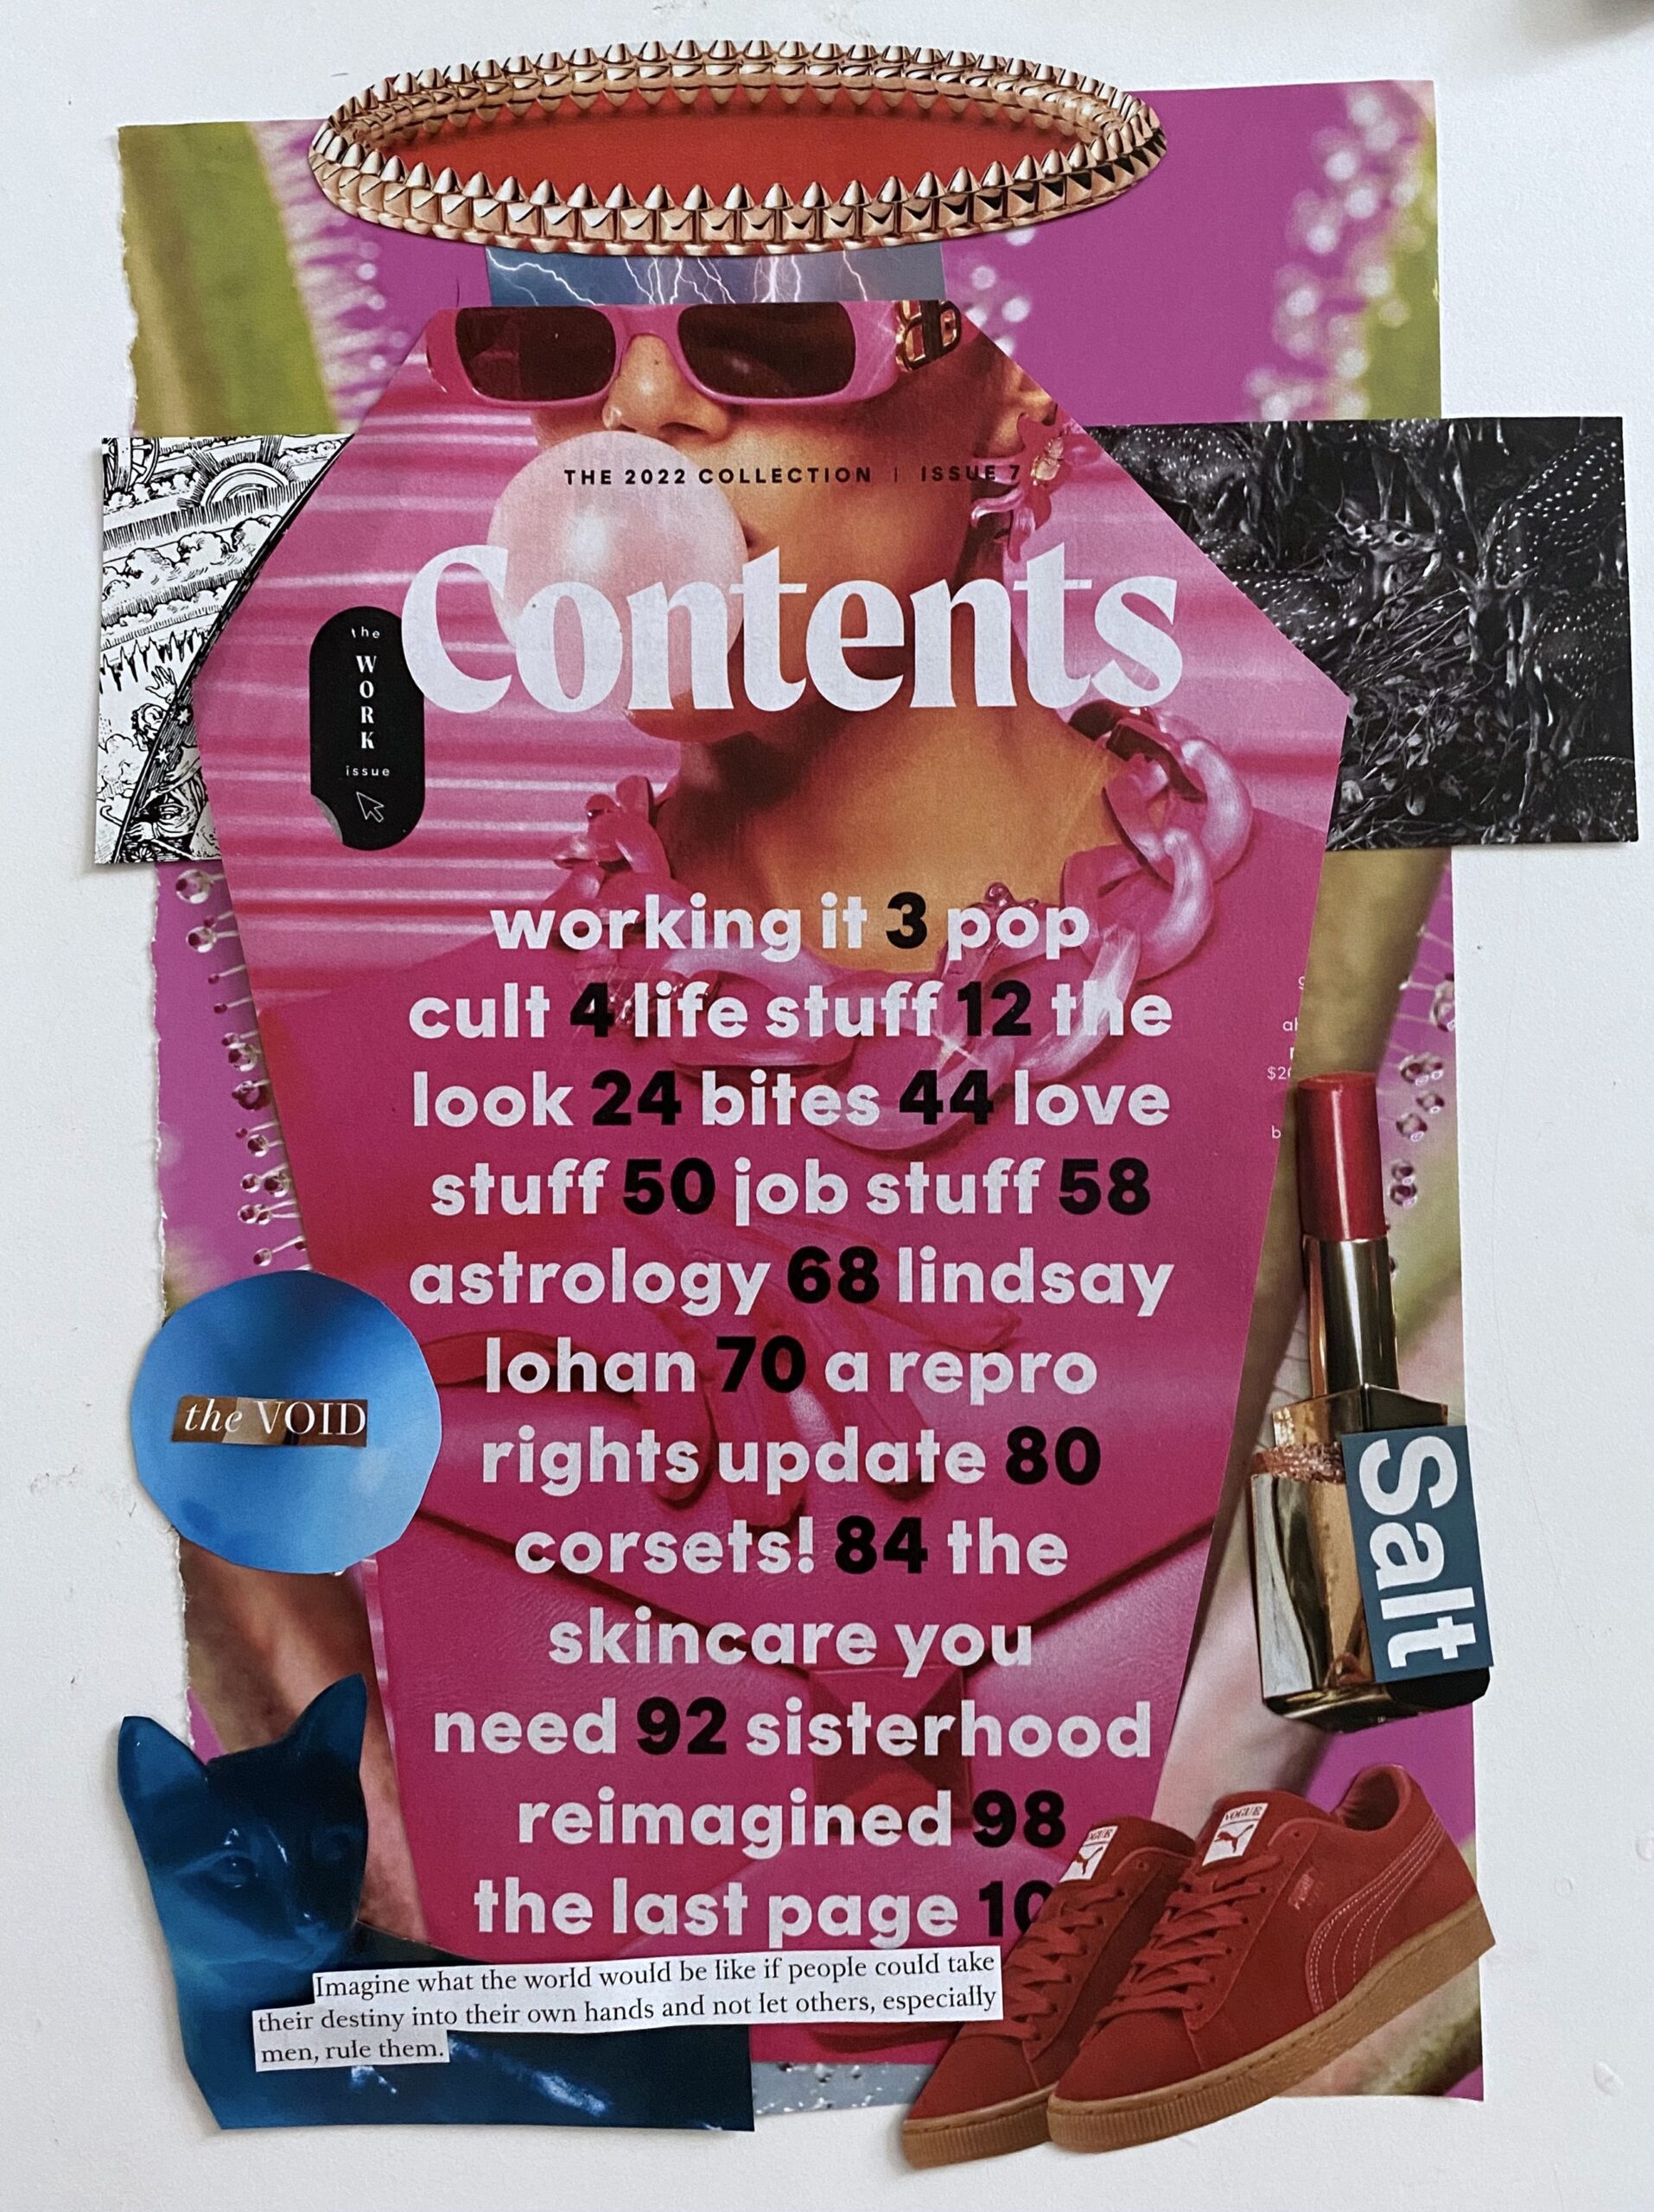 A collage of elements from a Cosmopolitan magazine (the Work issue) including the table of contents cut in the shape of a coffin, images of shoes, jewelry, and makeup, all surrounding the image of a white woman dressed in pink, blowing a pink bubble gum bubble. A quote at the bottom, from an interview with Iranian visual artist Shirin Neshat, reads "Imagine what the world would be like if people could take their destiny into their own hands and not let others, especially men, rule them."